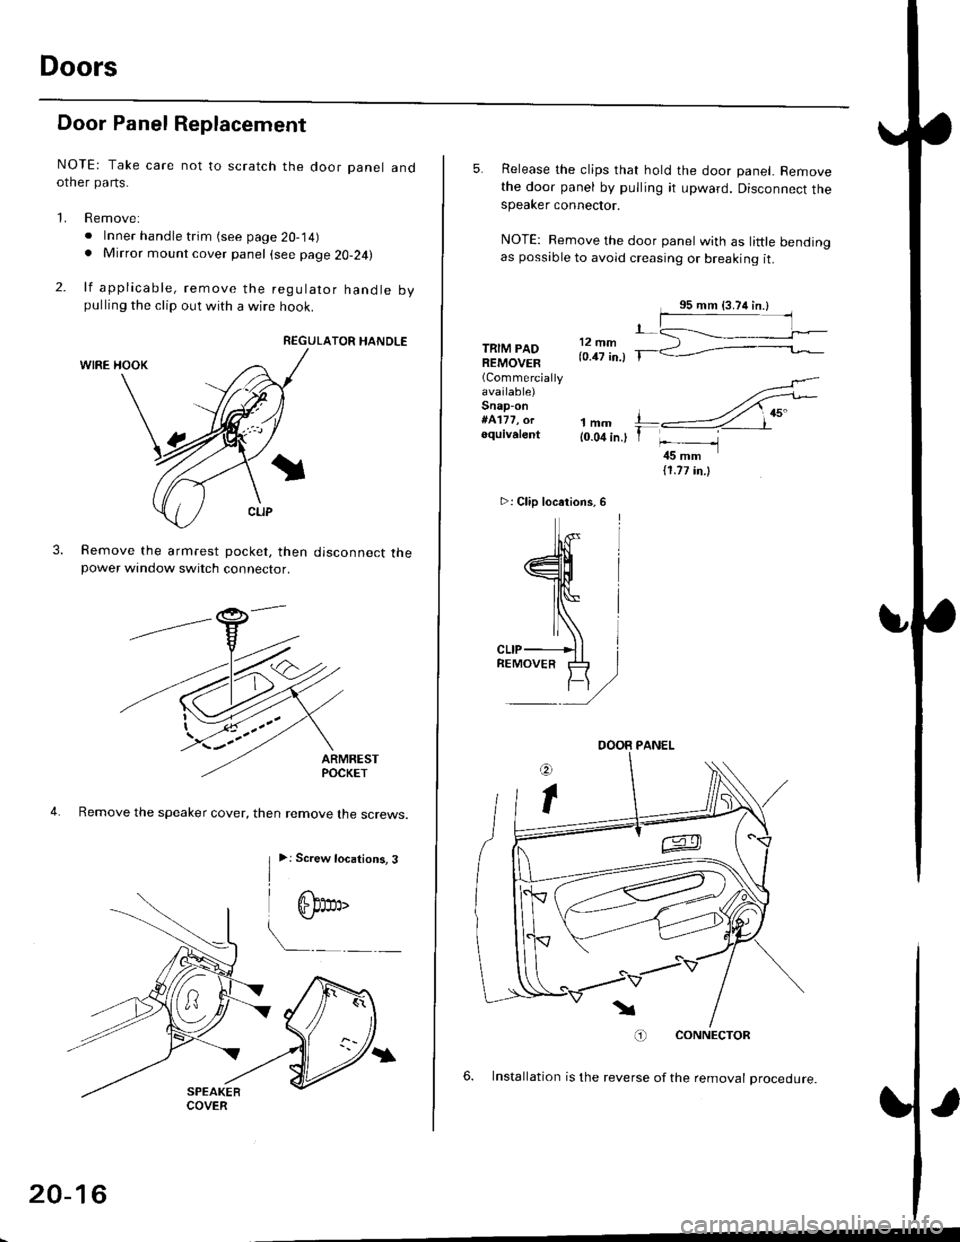 HONDA CIVIC 1998 6.G Workshop Manual Doors
Door Panel Replacement
NOTE: Take care not to scratch the door panel andother pa rts.
1. Remove:
. Inner handle trim (see page 20-14). Mirror mount cover panel (see page 20-24)
2. lf applicable